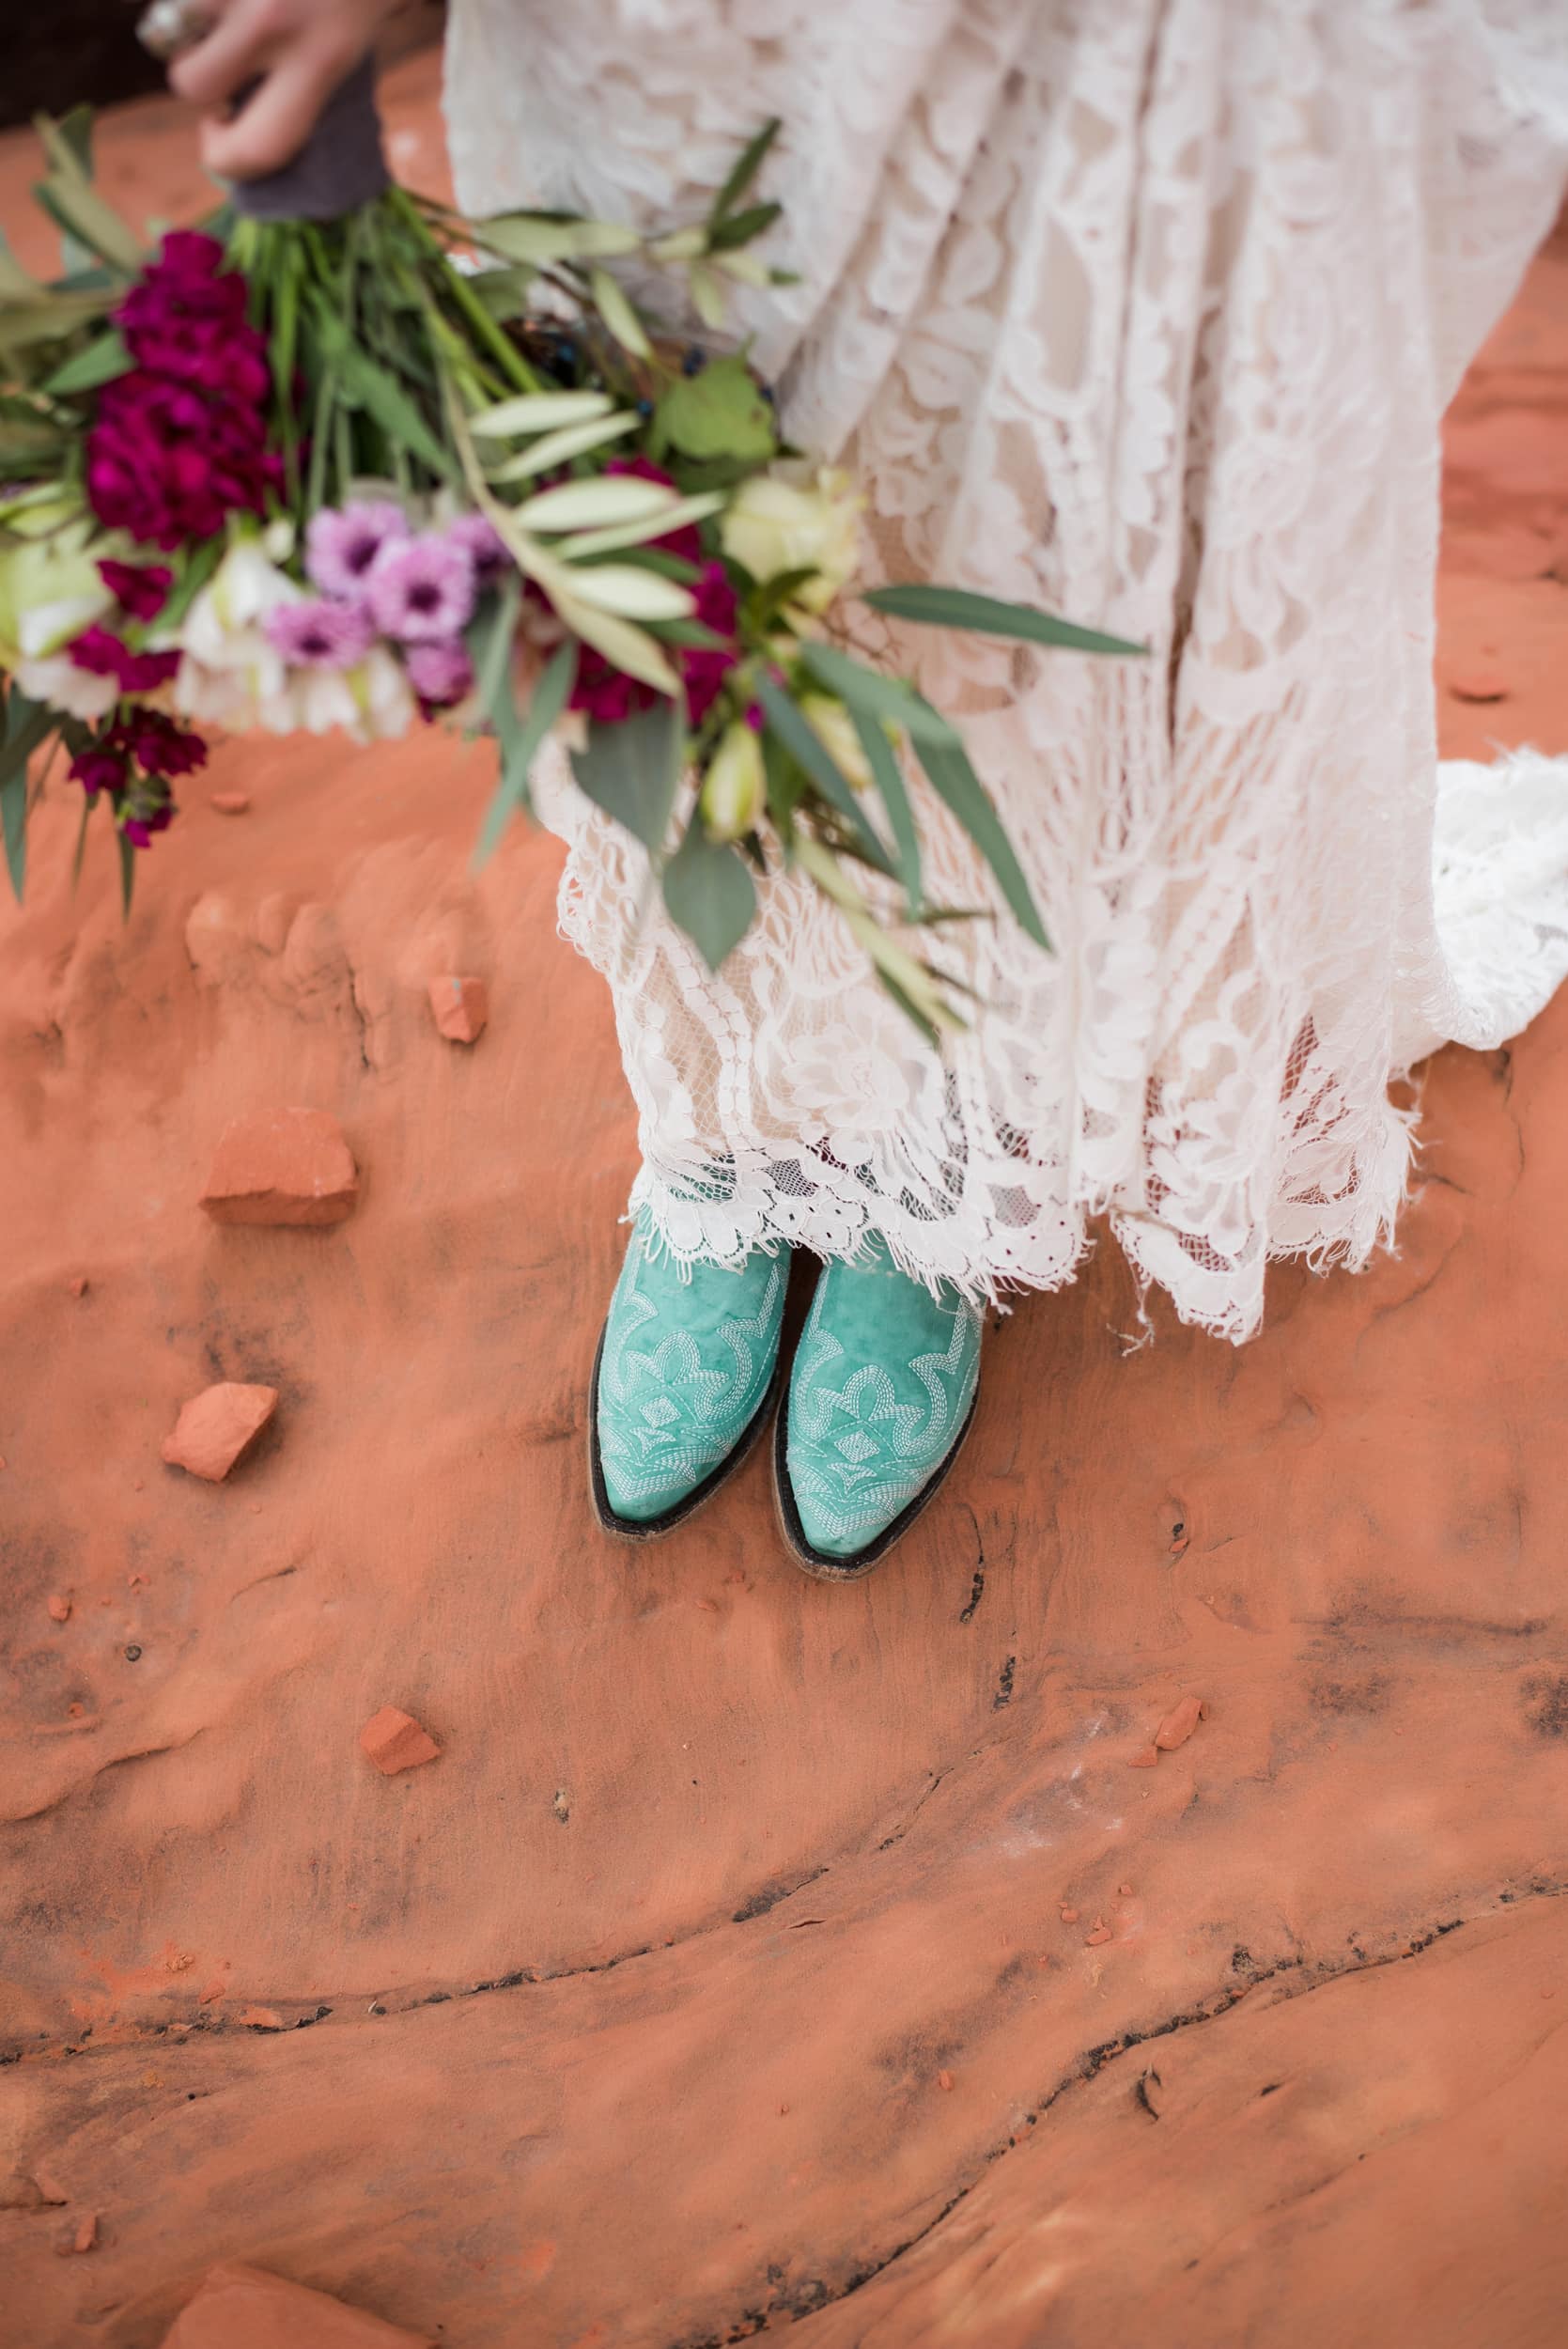 Person in white dress and blue cowboy boots holding a wedding bouquest.